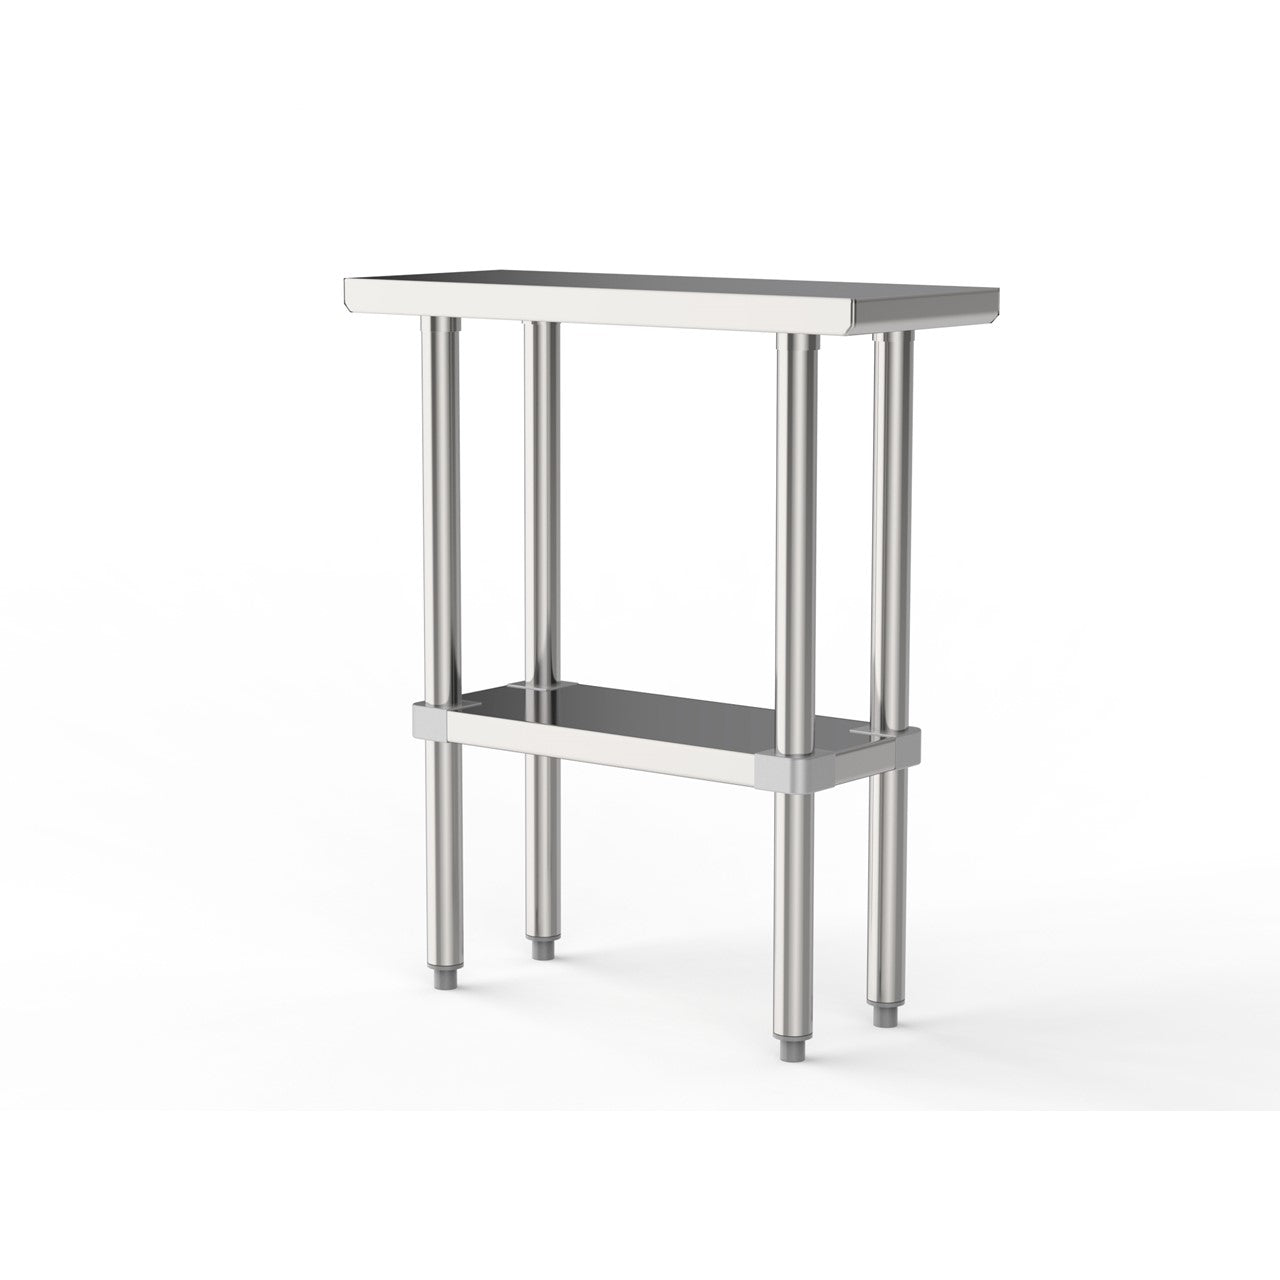 GSW Commercial Grade Flat Top Work Table with Stainless Steel Top, Galvanized Undershelf & Legs, Adjustable Bullet Feet, Perfect for Restaurant, Home, Office, Kitchen or Garage, NSF Approved (24"W x 12"L x 35"H)